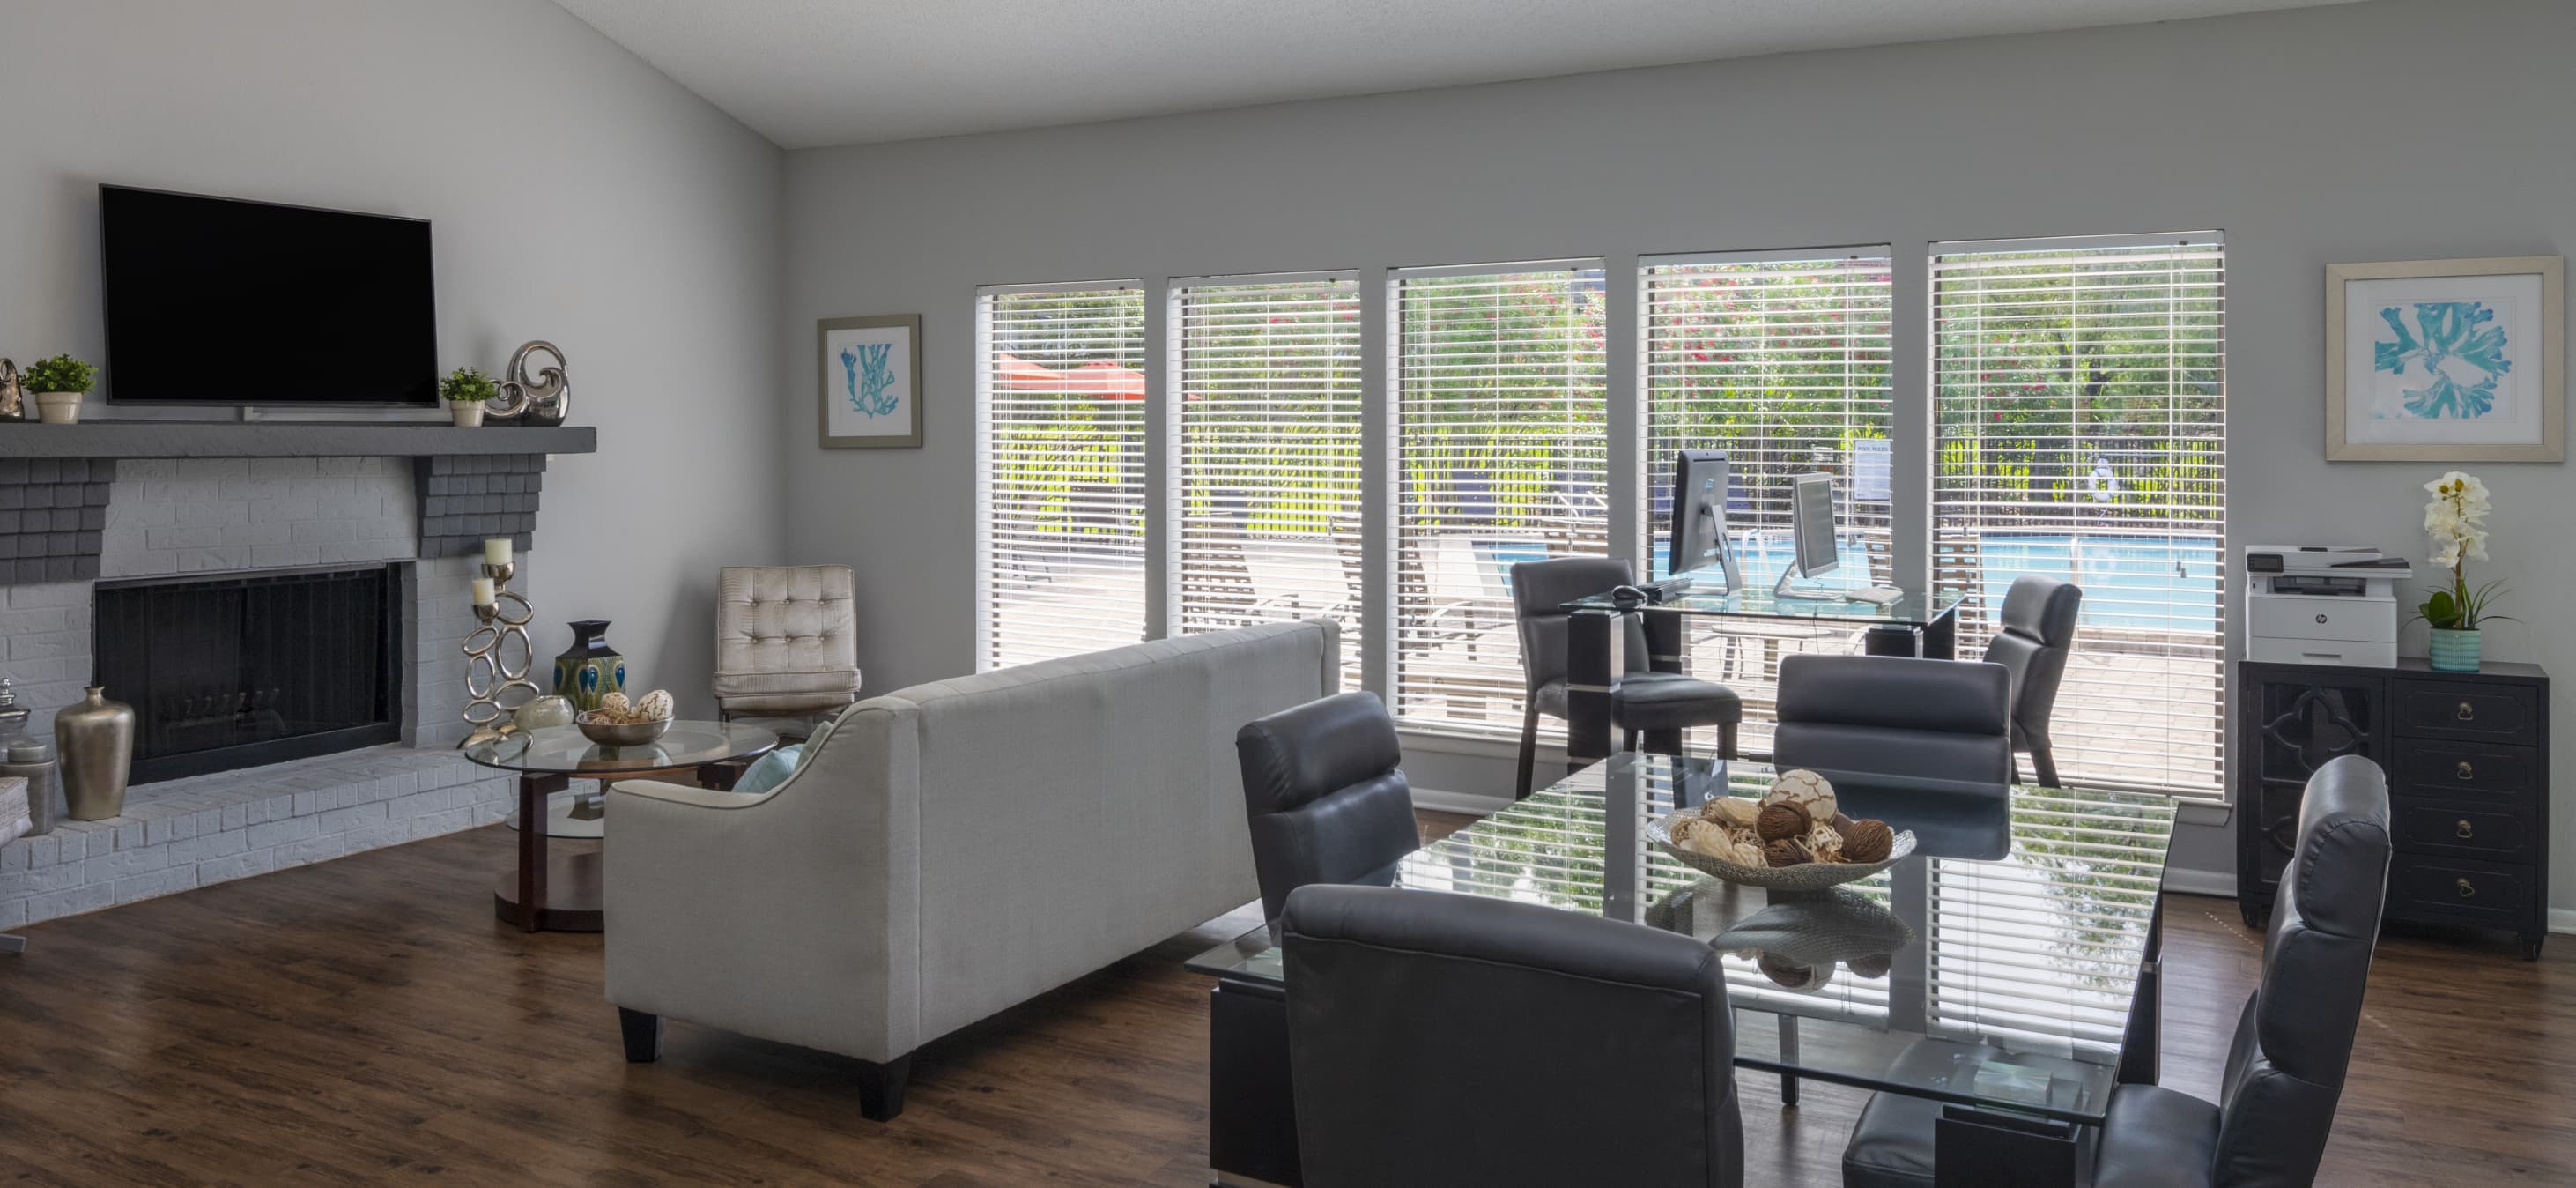 Tiffany Oaks Luxury Apartments For Rent In Altamonte